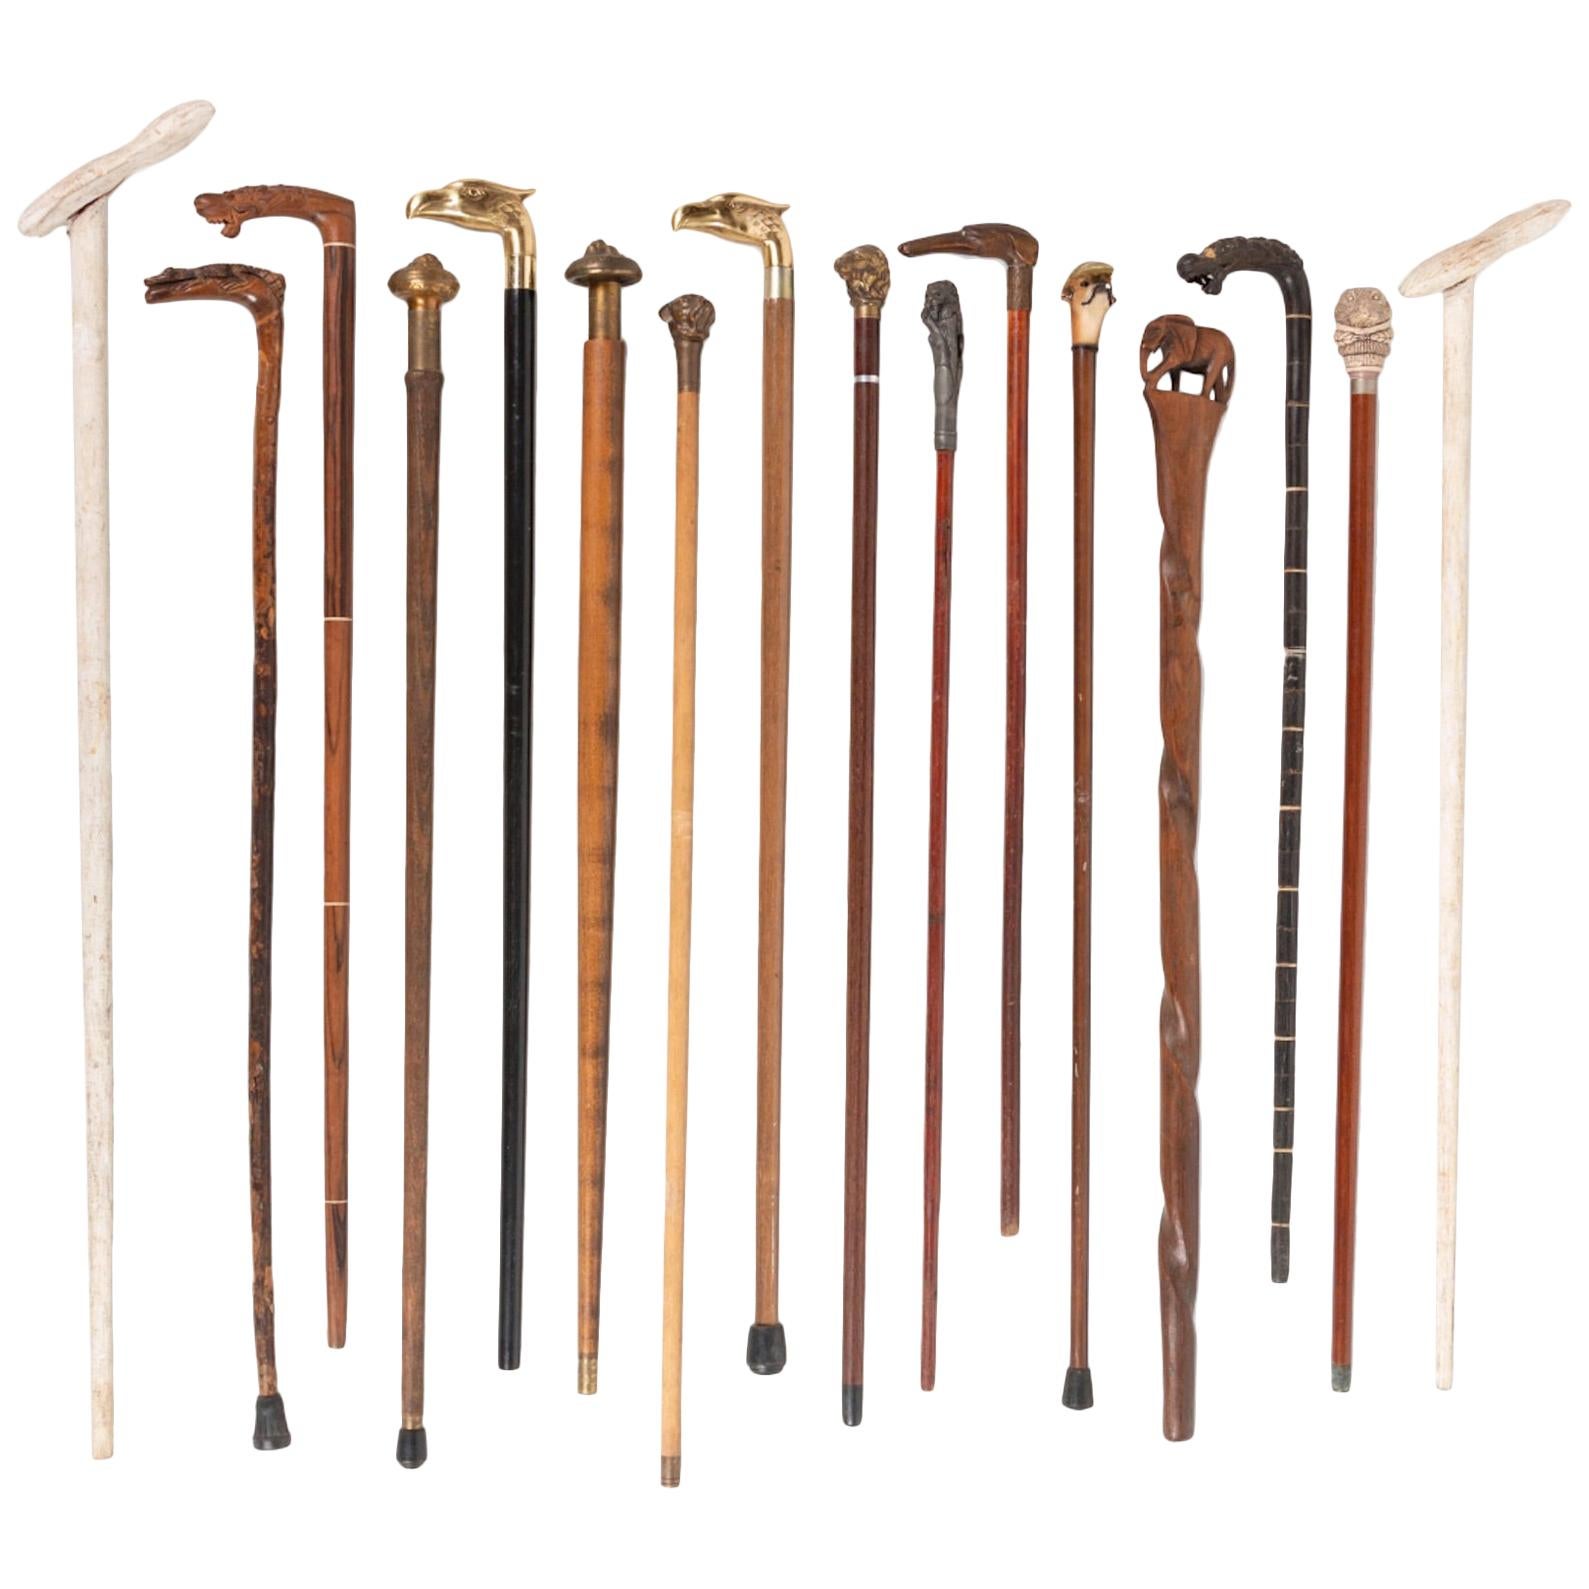 Handsome Collection of 16 19th Century English Walking Sticks, Some with Daggers